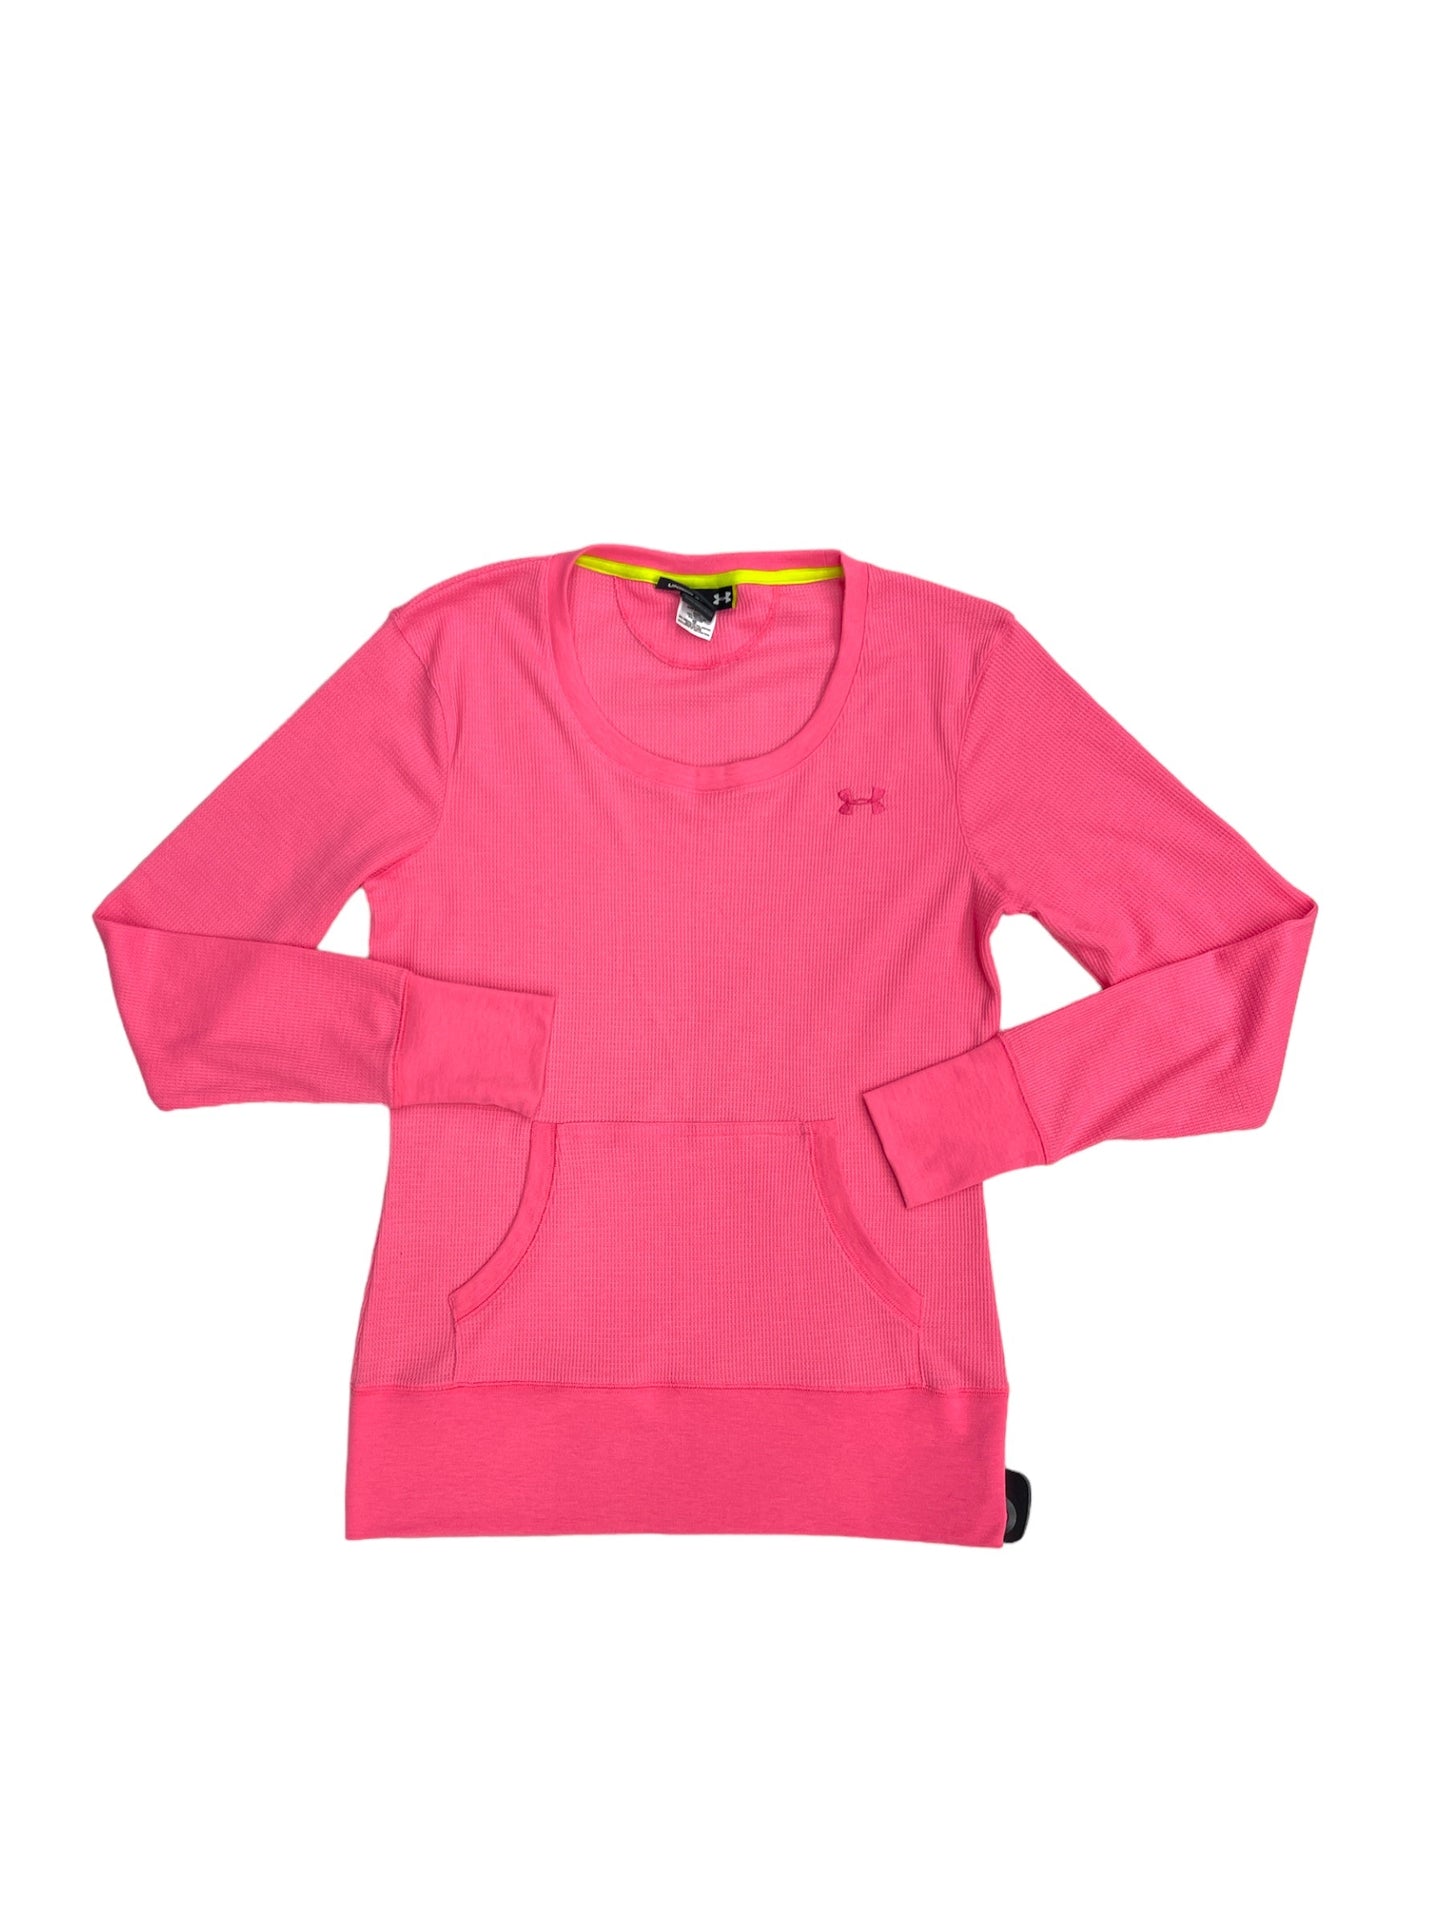 Pink Athletic Top Long Sleeve Crewneck Under Armour, Size S